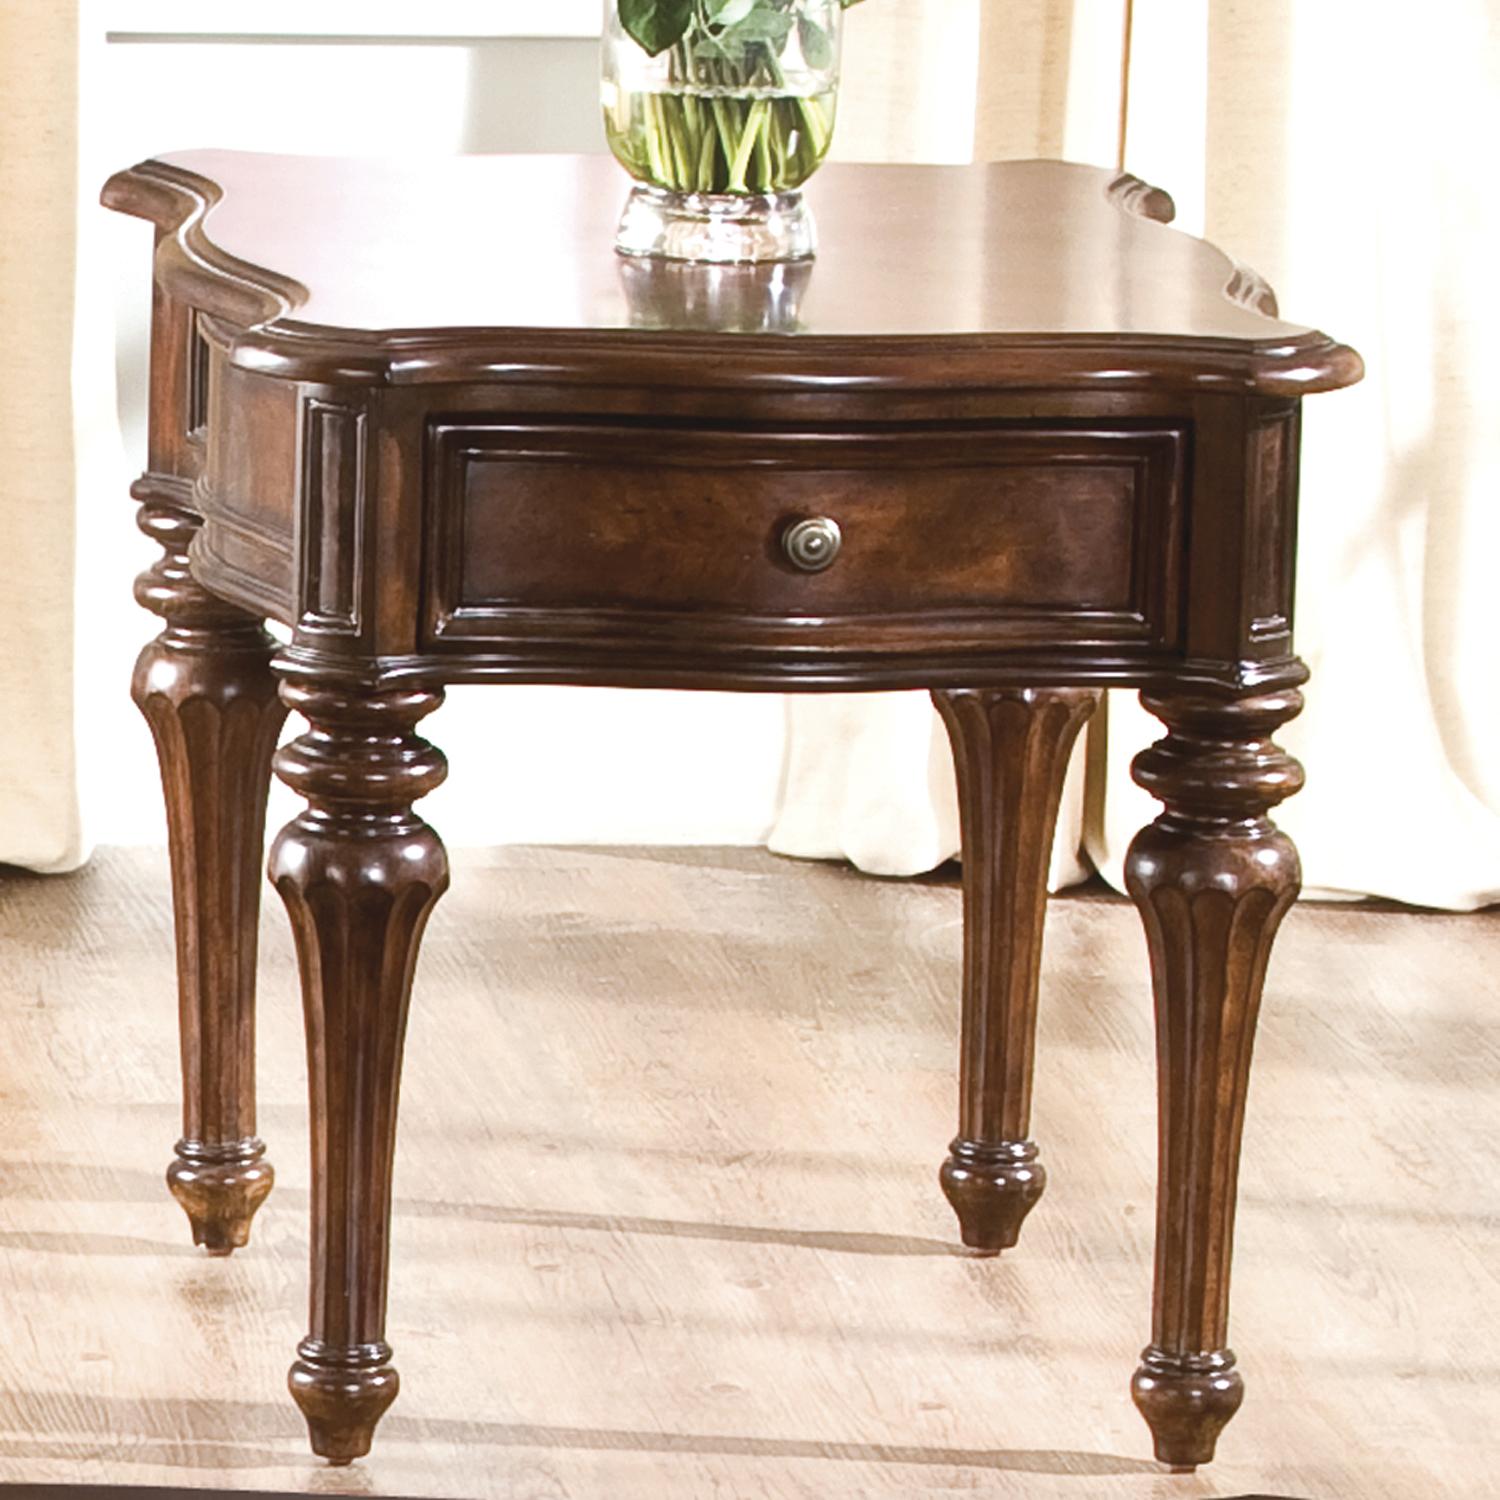 andalusia traditional end table rotmans tables products liberty furniture color elegant wood pet side homesense oakville nesting living room teak light brown leather ott coffee